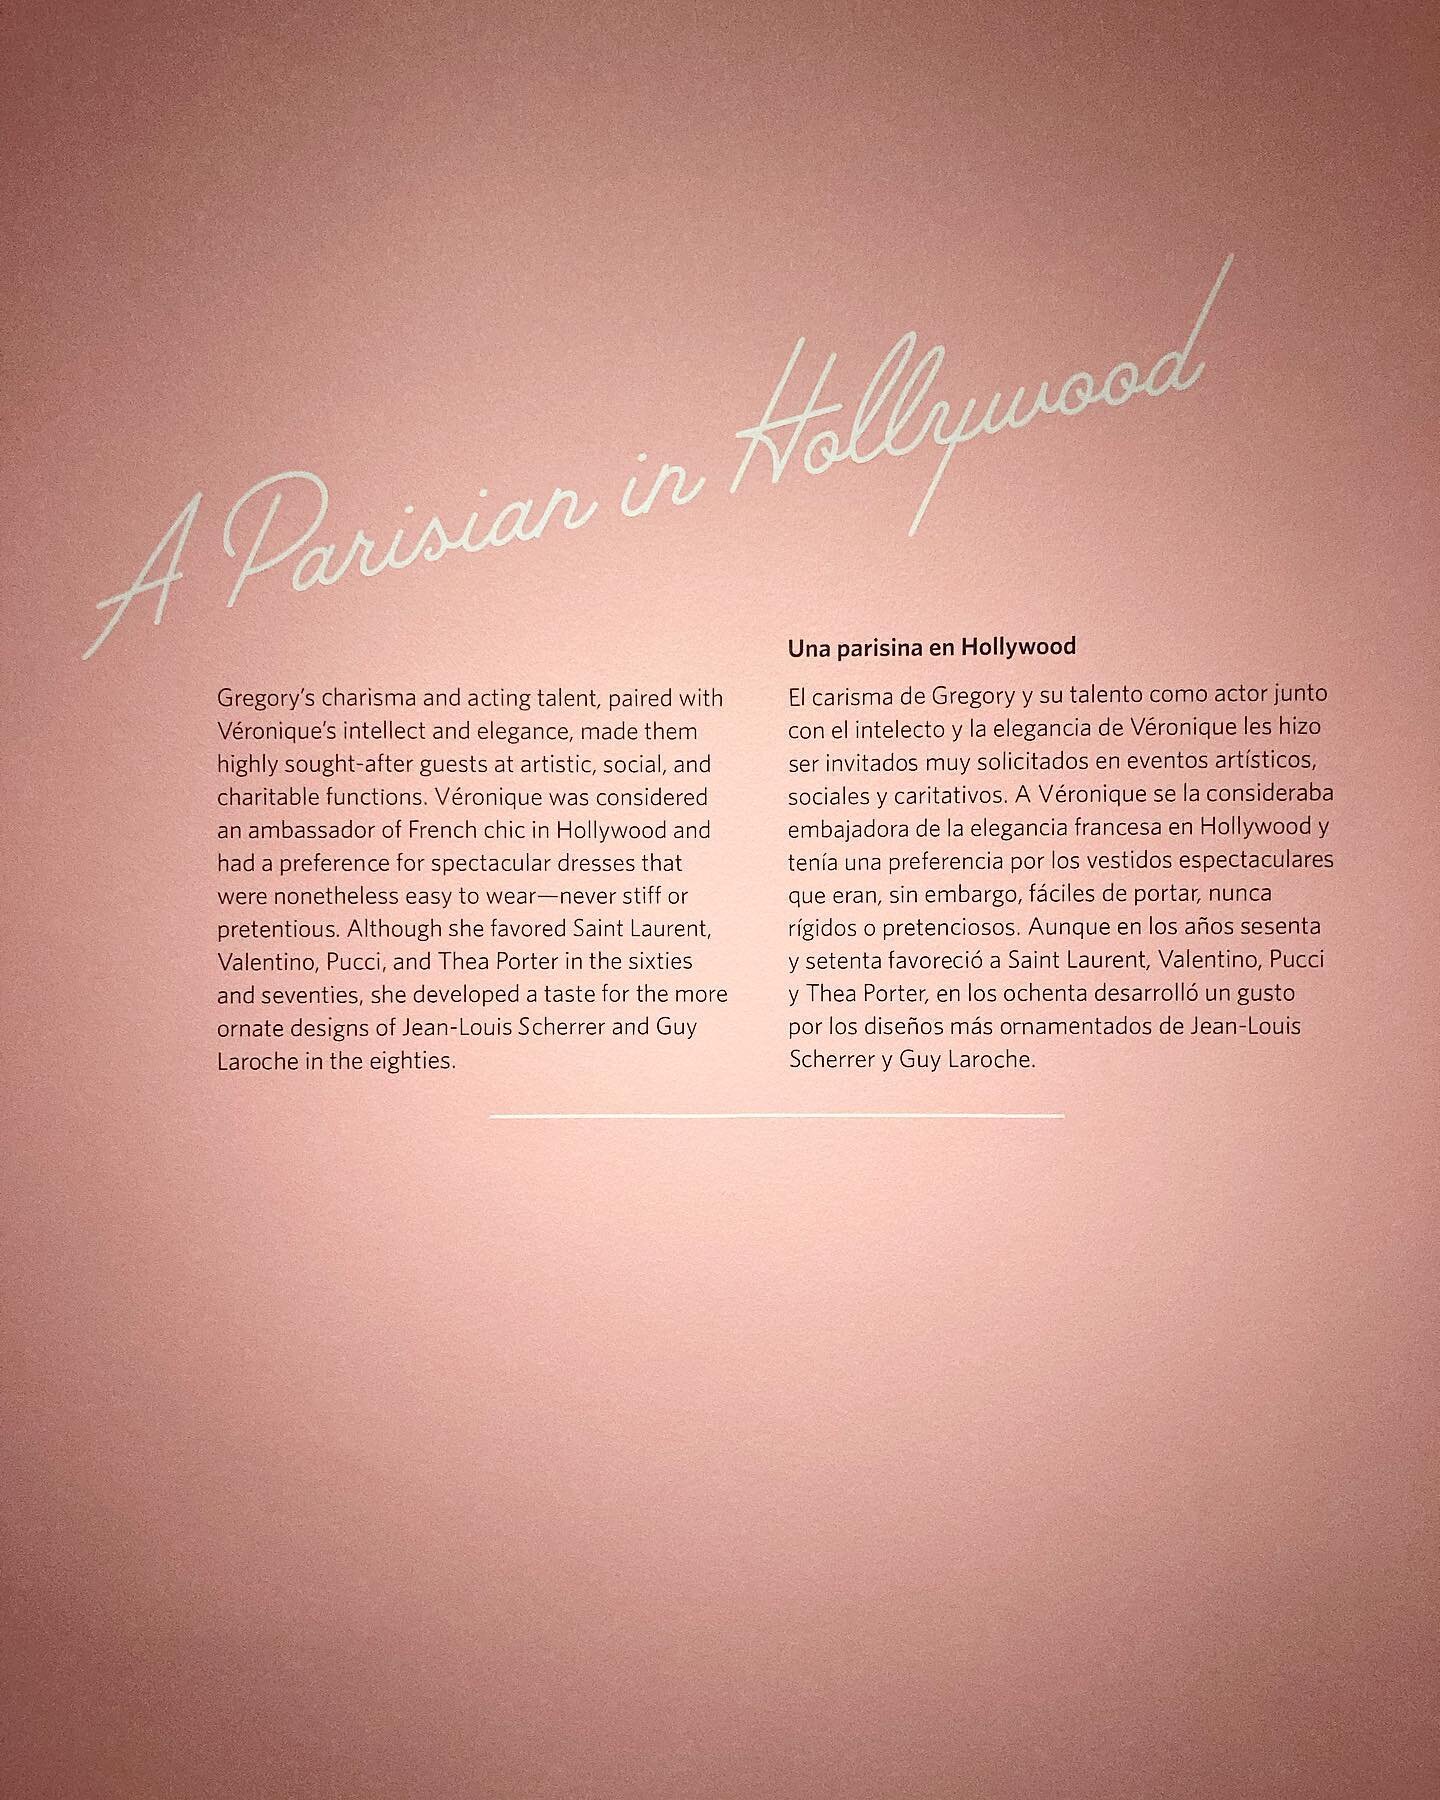 Whether you&rsquo;re into old Hollywood or love a good fashion exhibit, the &lsquo;Paris to Hollywood;  The Fashion and Influence of V&eacute;ronique and Gregory Peck&rsquo; exhibit at Denver Art Museum was a must-visit. 🎥👗🧥

The exhibit focused o